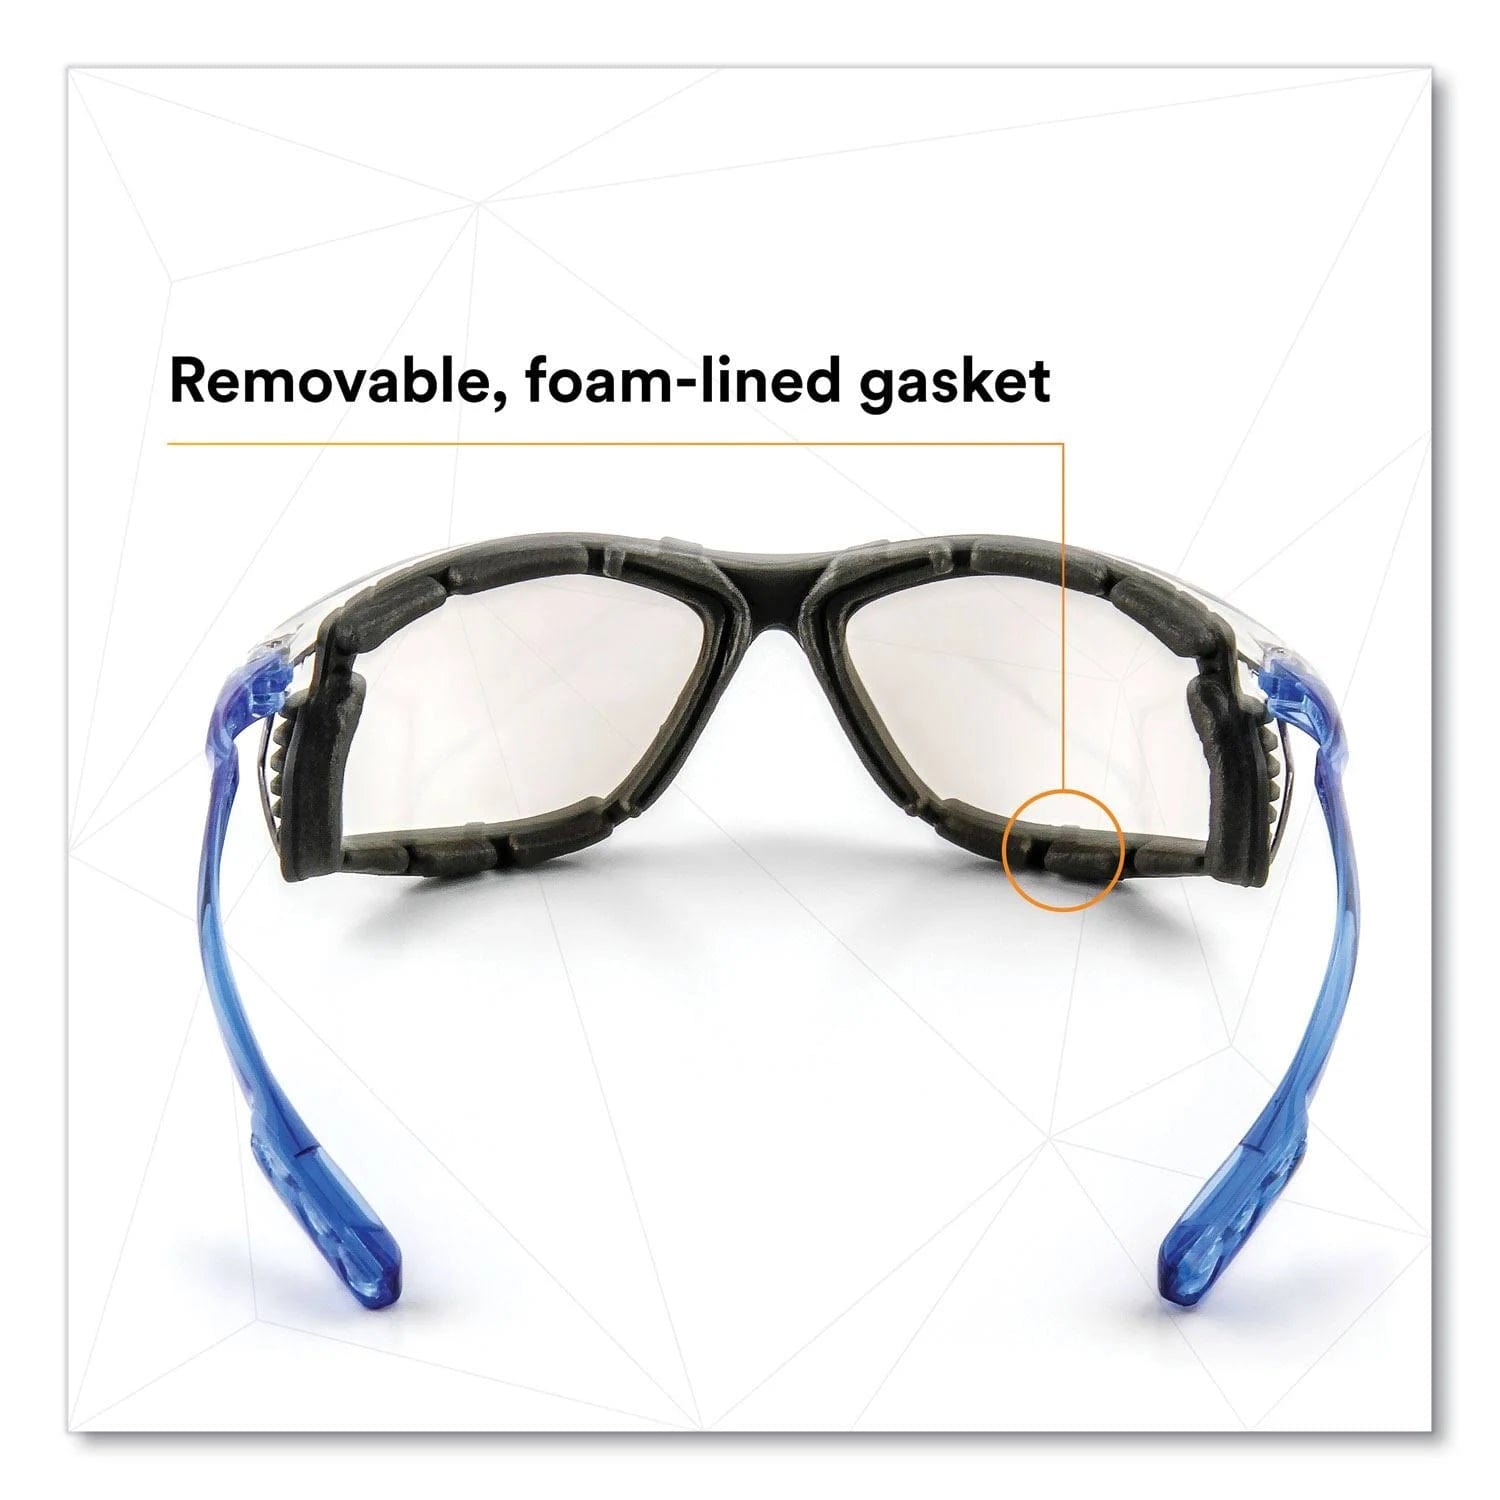 3M Virtua CCS Safety Glasses with Blue Temples Foam Gasket and Indoor/Outdoor Anti-Fog Lens Foam Insert View